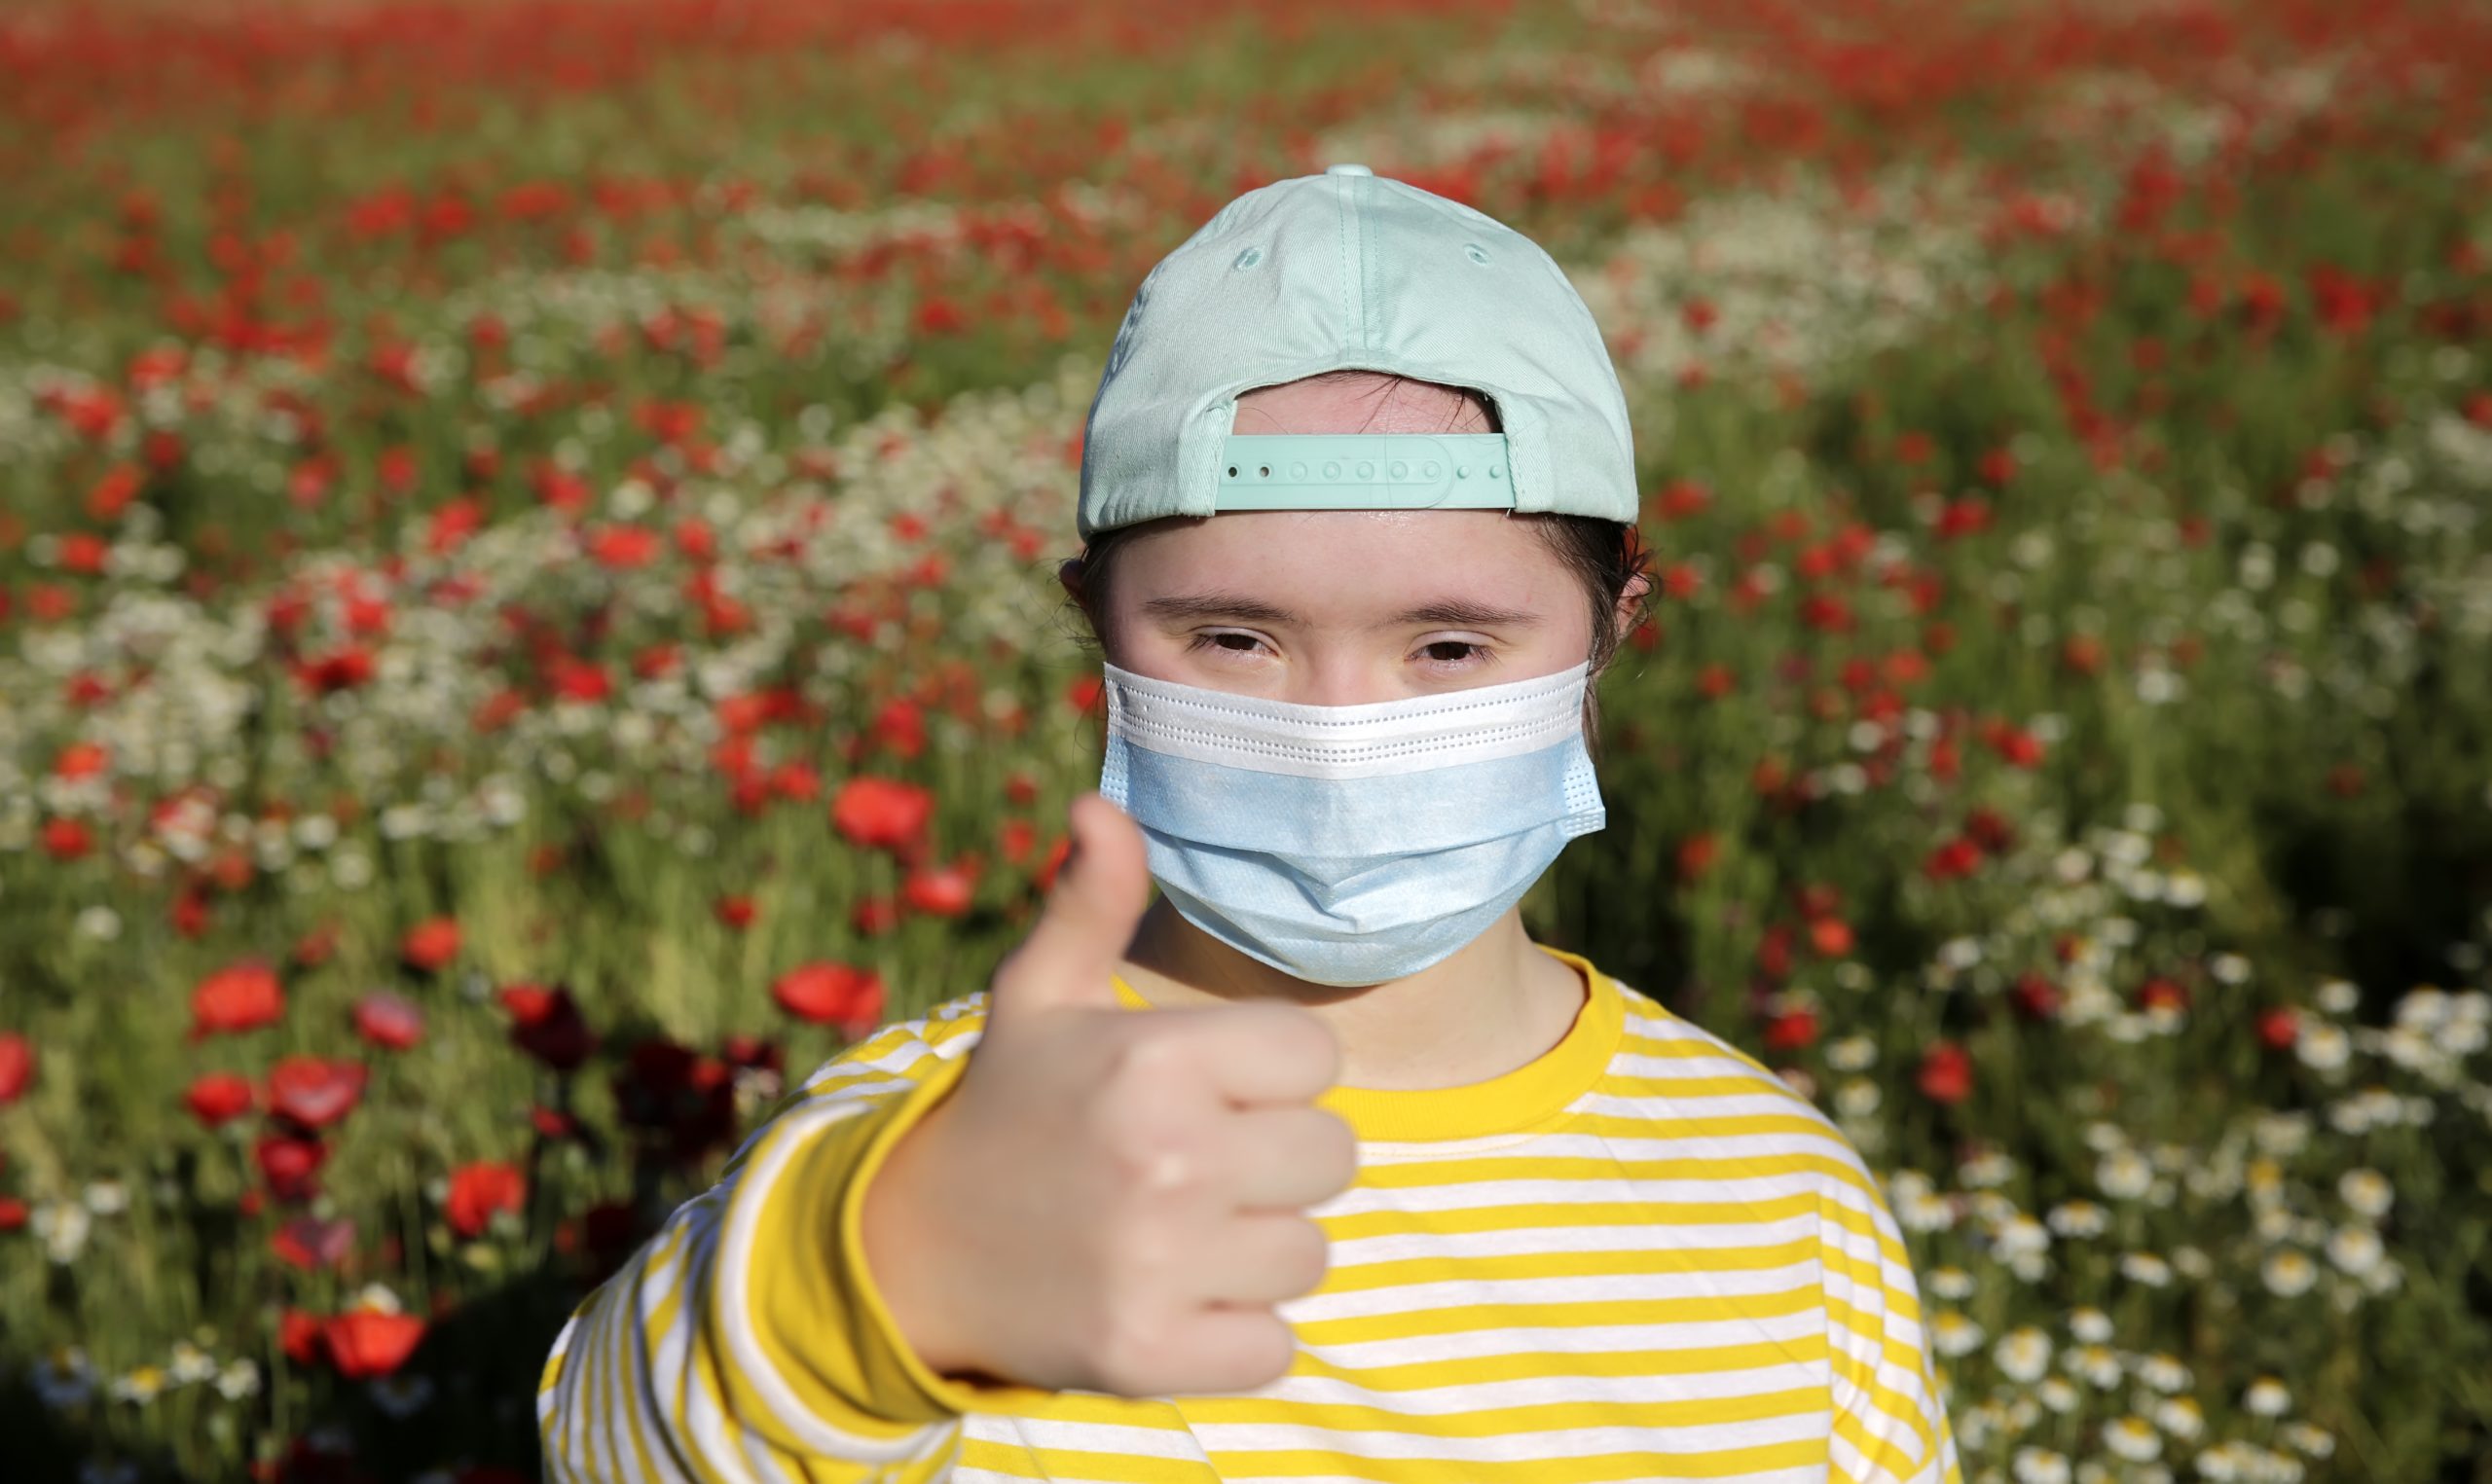 image: a girl with obvious disabilities wearing a yellow shirt, a backwards cap and a face mask holding a thumb up for the camera